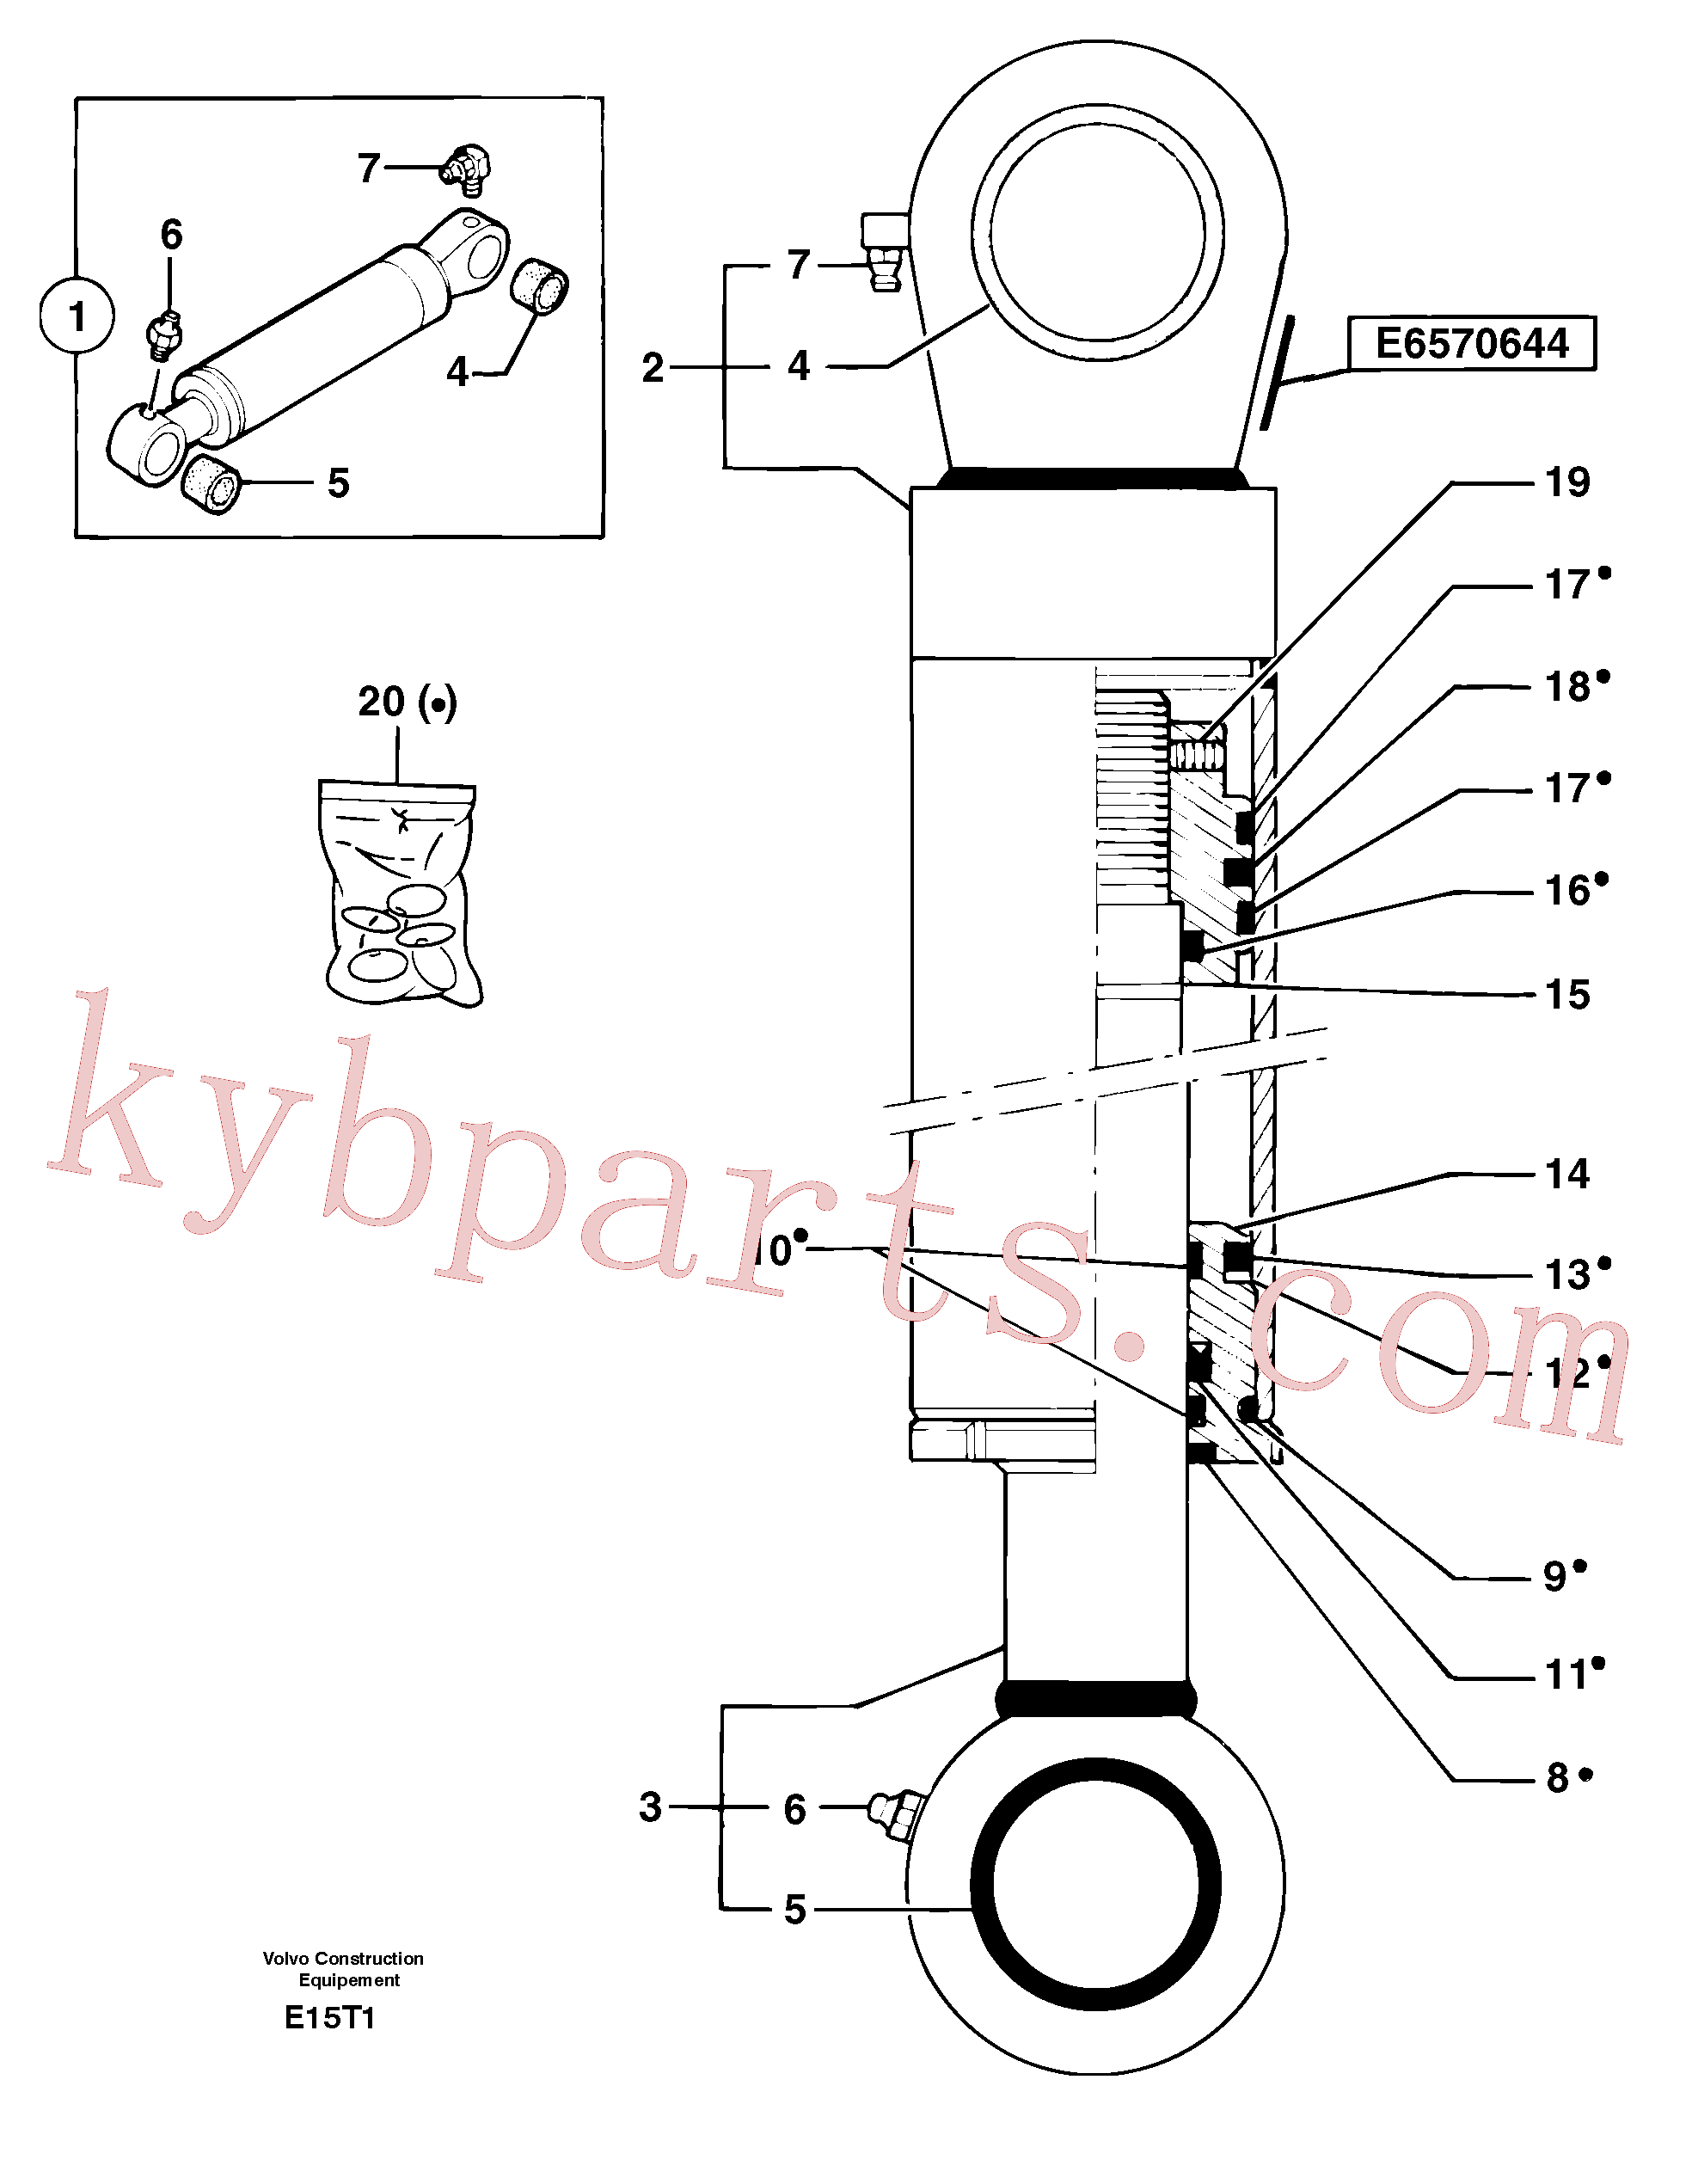 PJ5670644 for Volvo Bucket cylinder(E15T1 assembly)